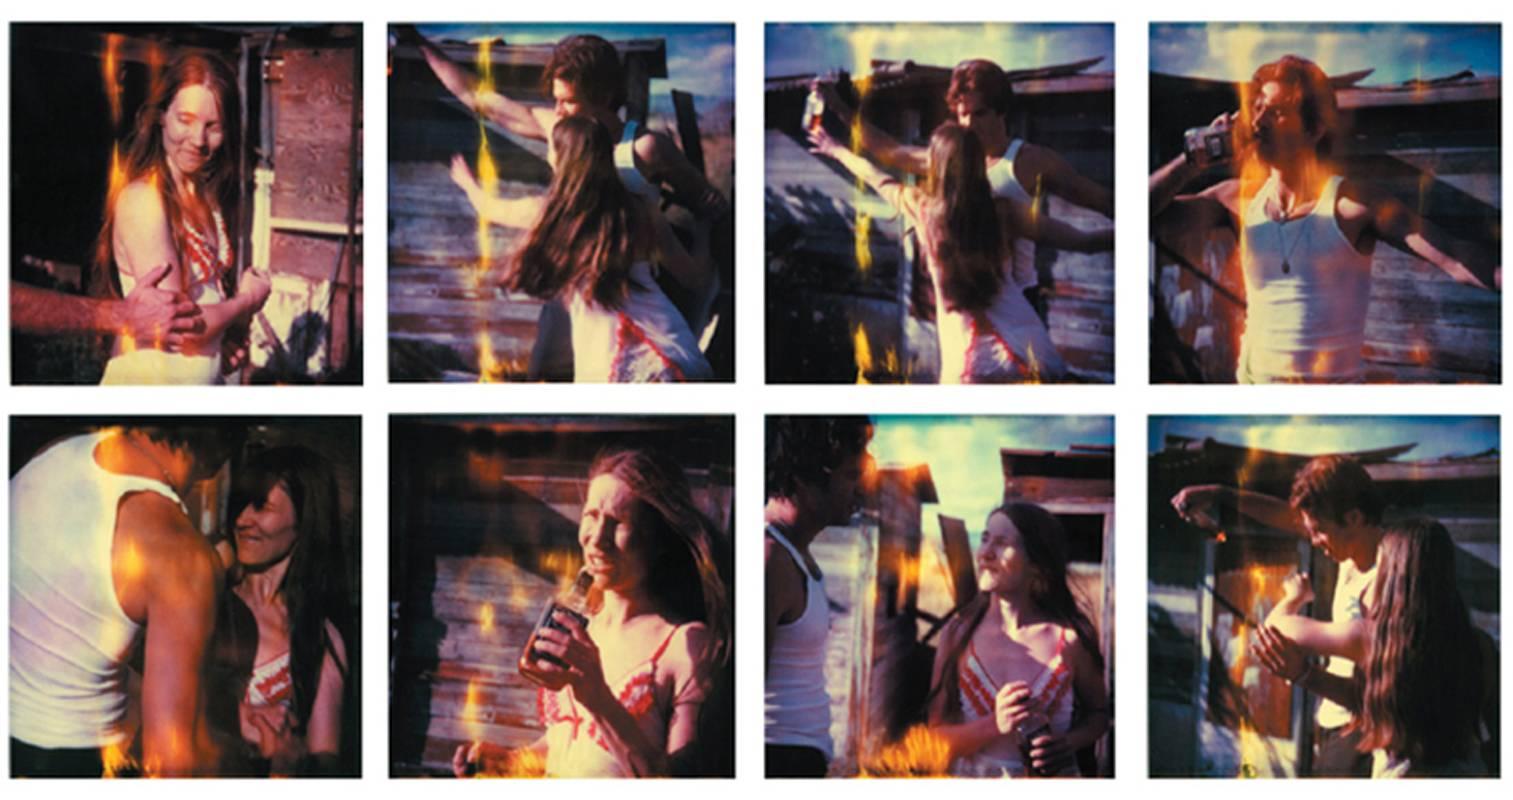 Whisky Dance I - Sidewinder - 8 pieces based on the original SX-70 Polaroids